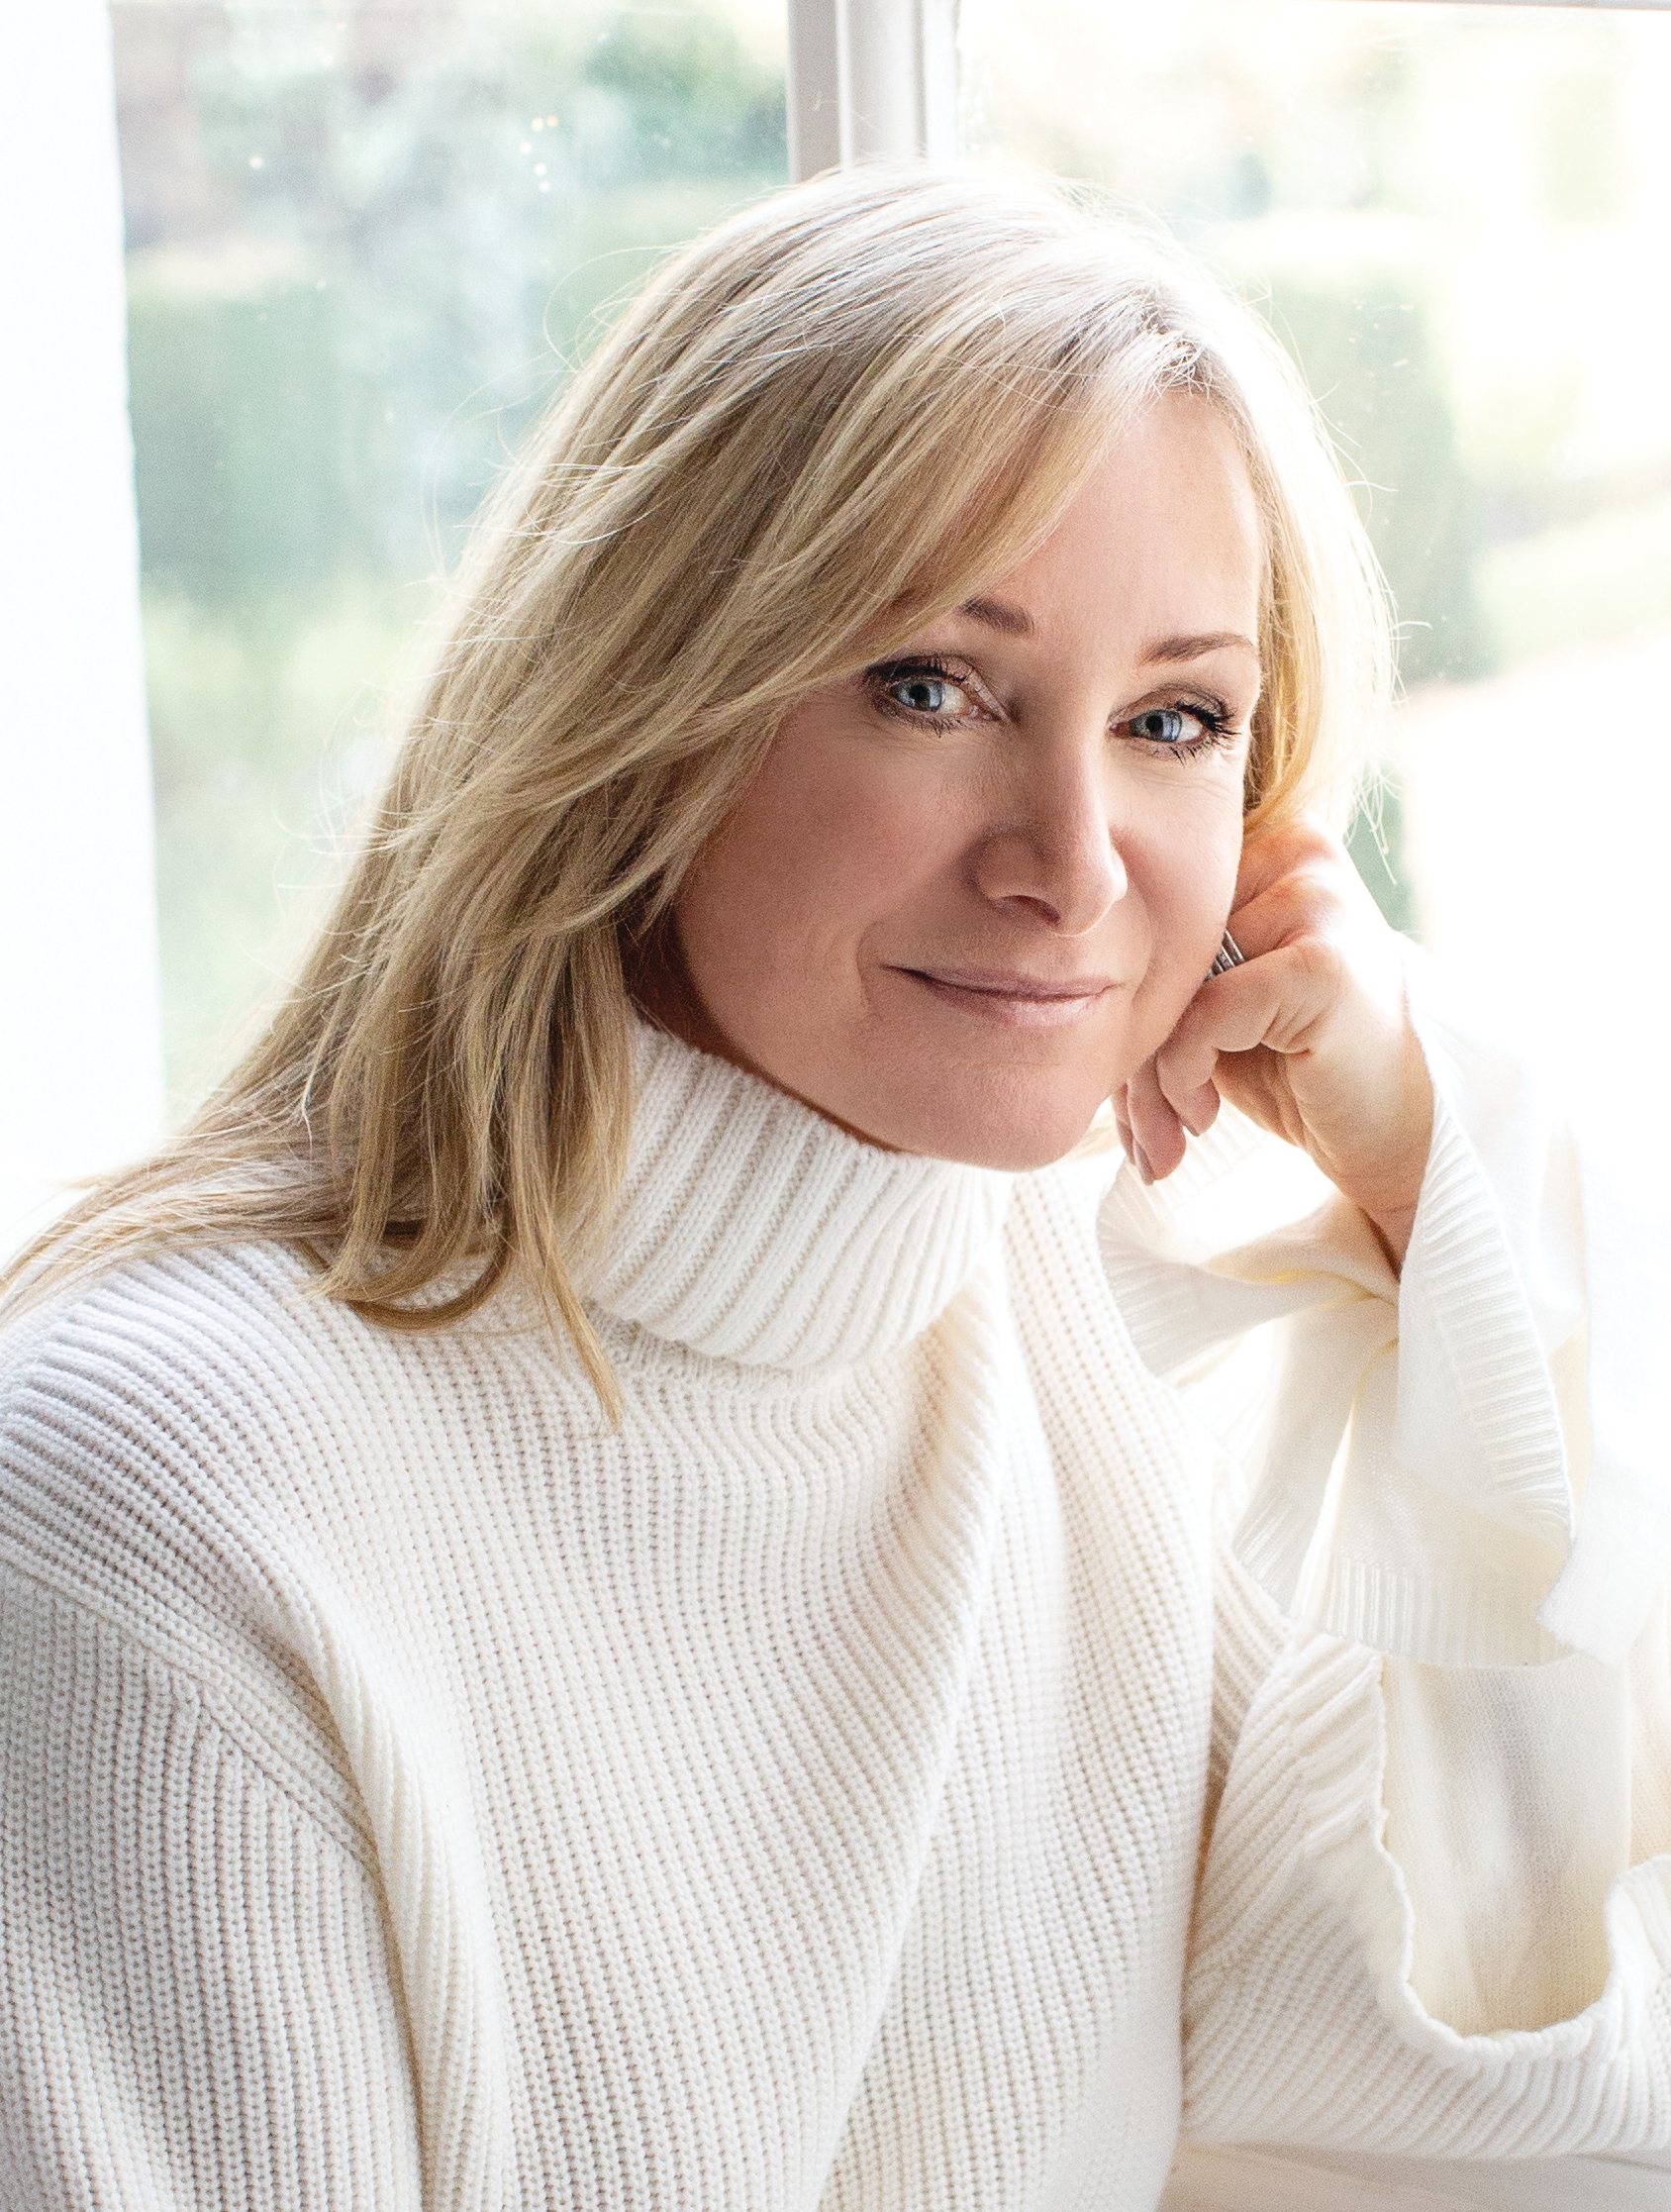 image of Chrissie Rucker, owner of The White Company, a blond woman wearing a white sweater